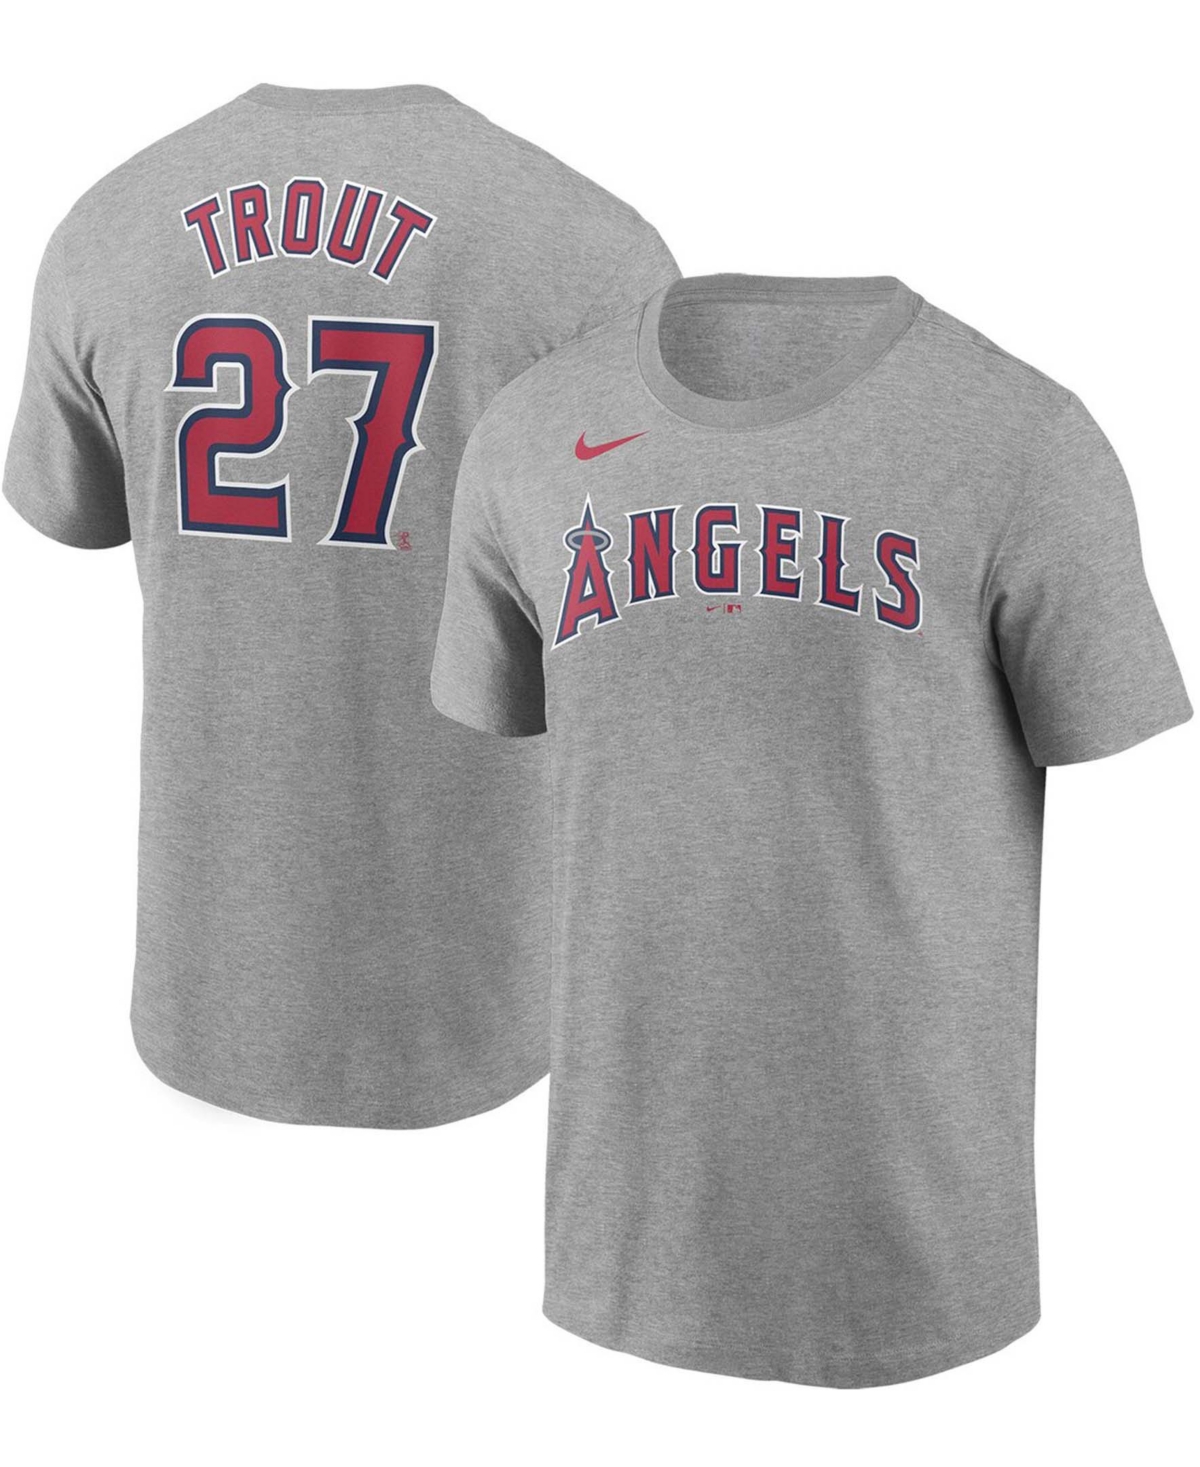 Men's Mike Trout Gray Los Angeles Angels Name and Number T-shirt